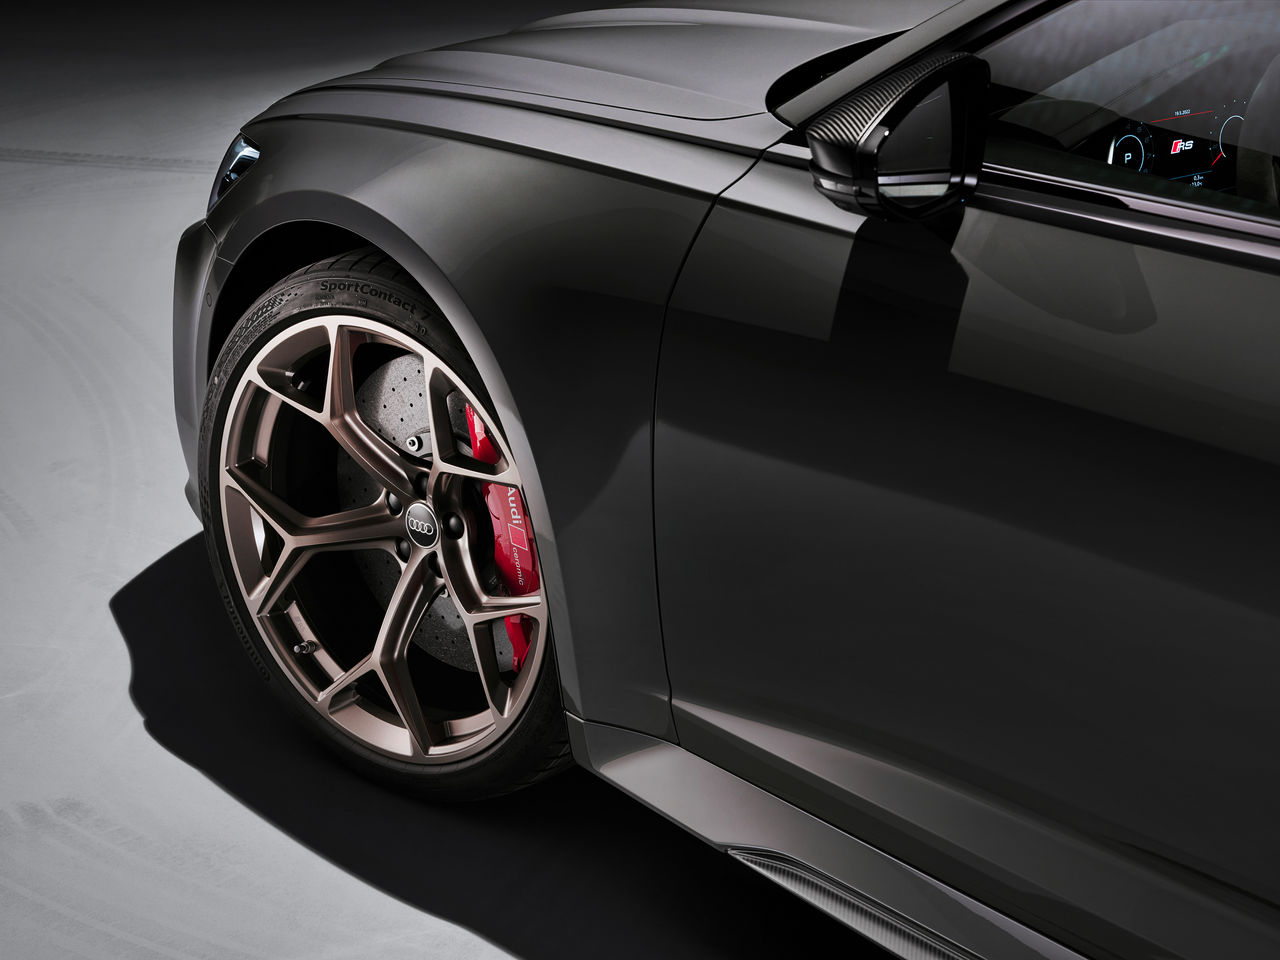 Audi Relies on SportContact 7 Tyres for its RS 6 Avant performance